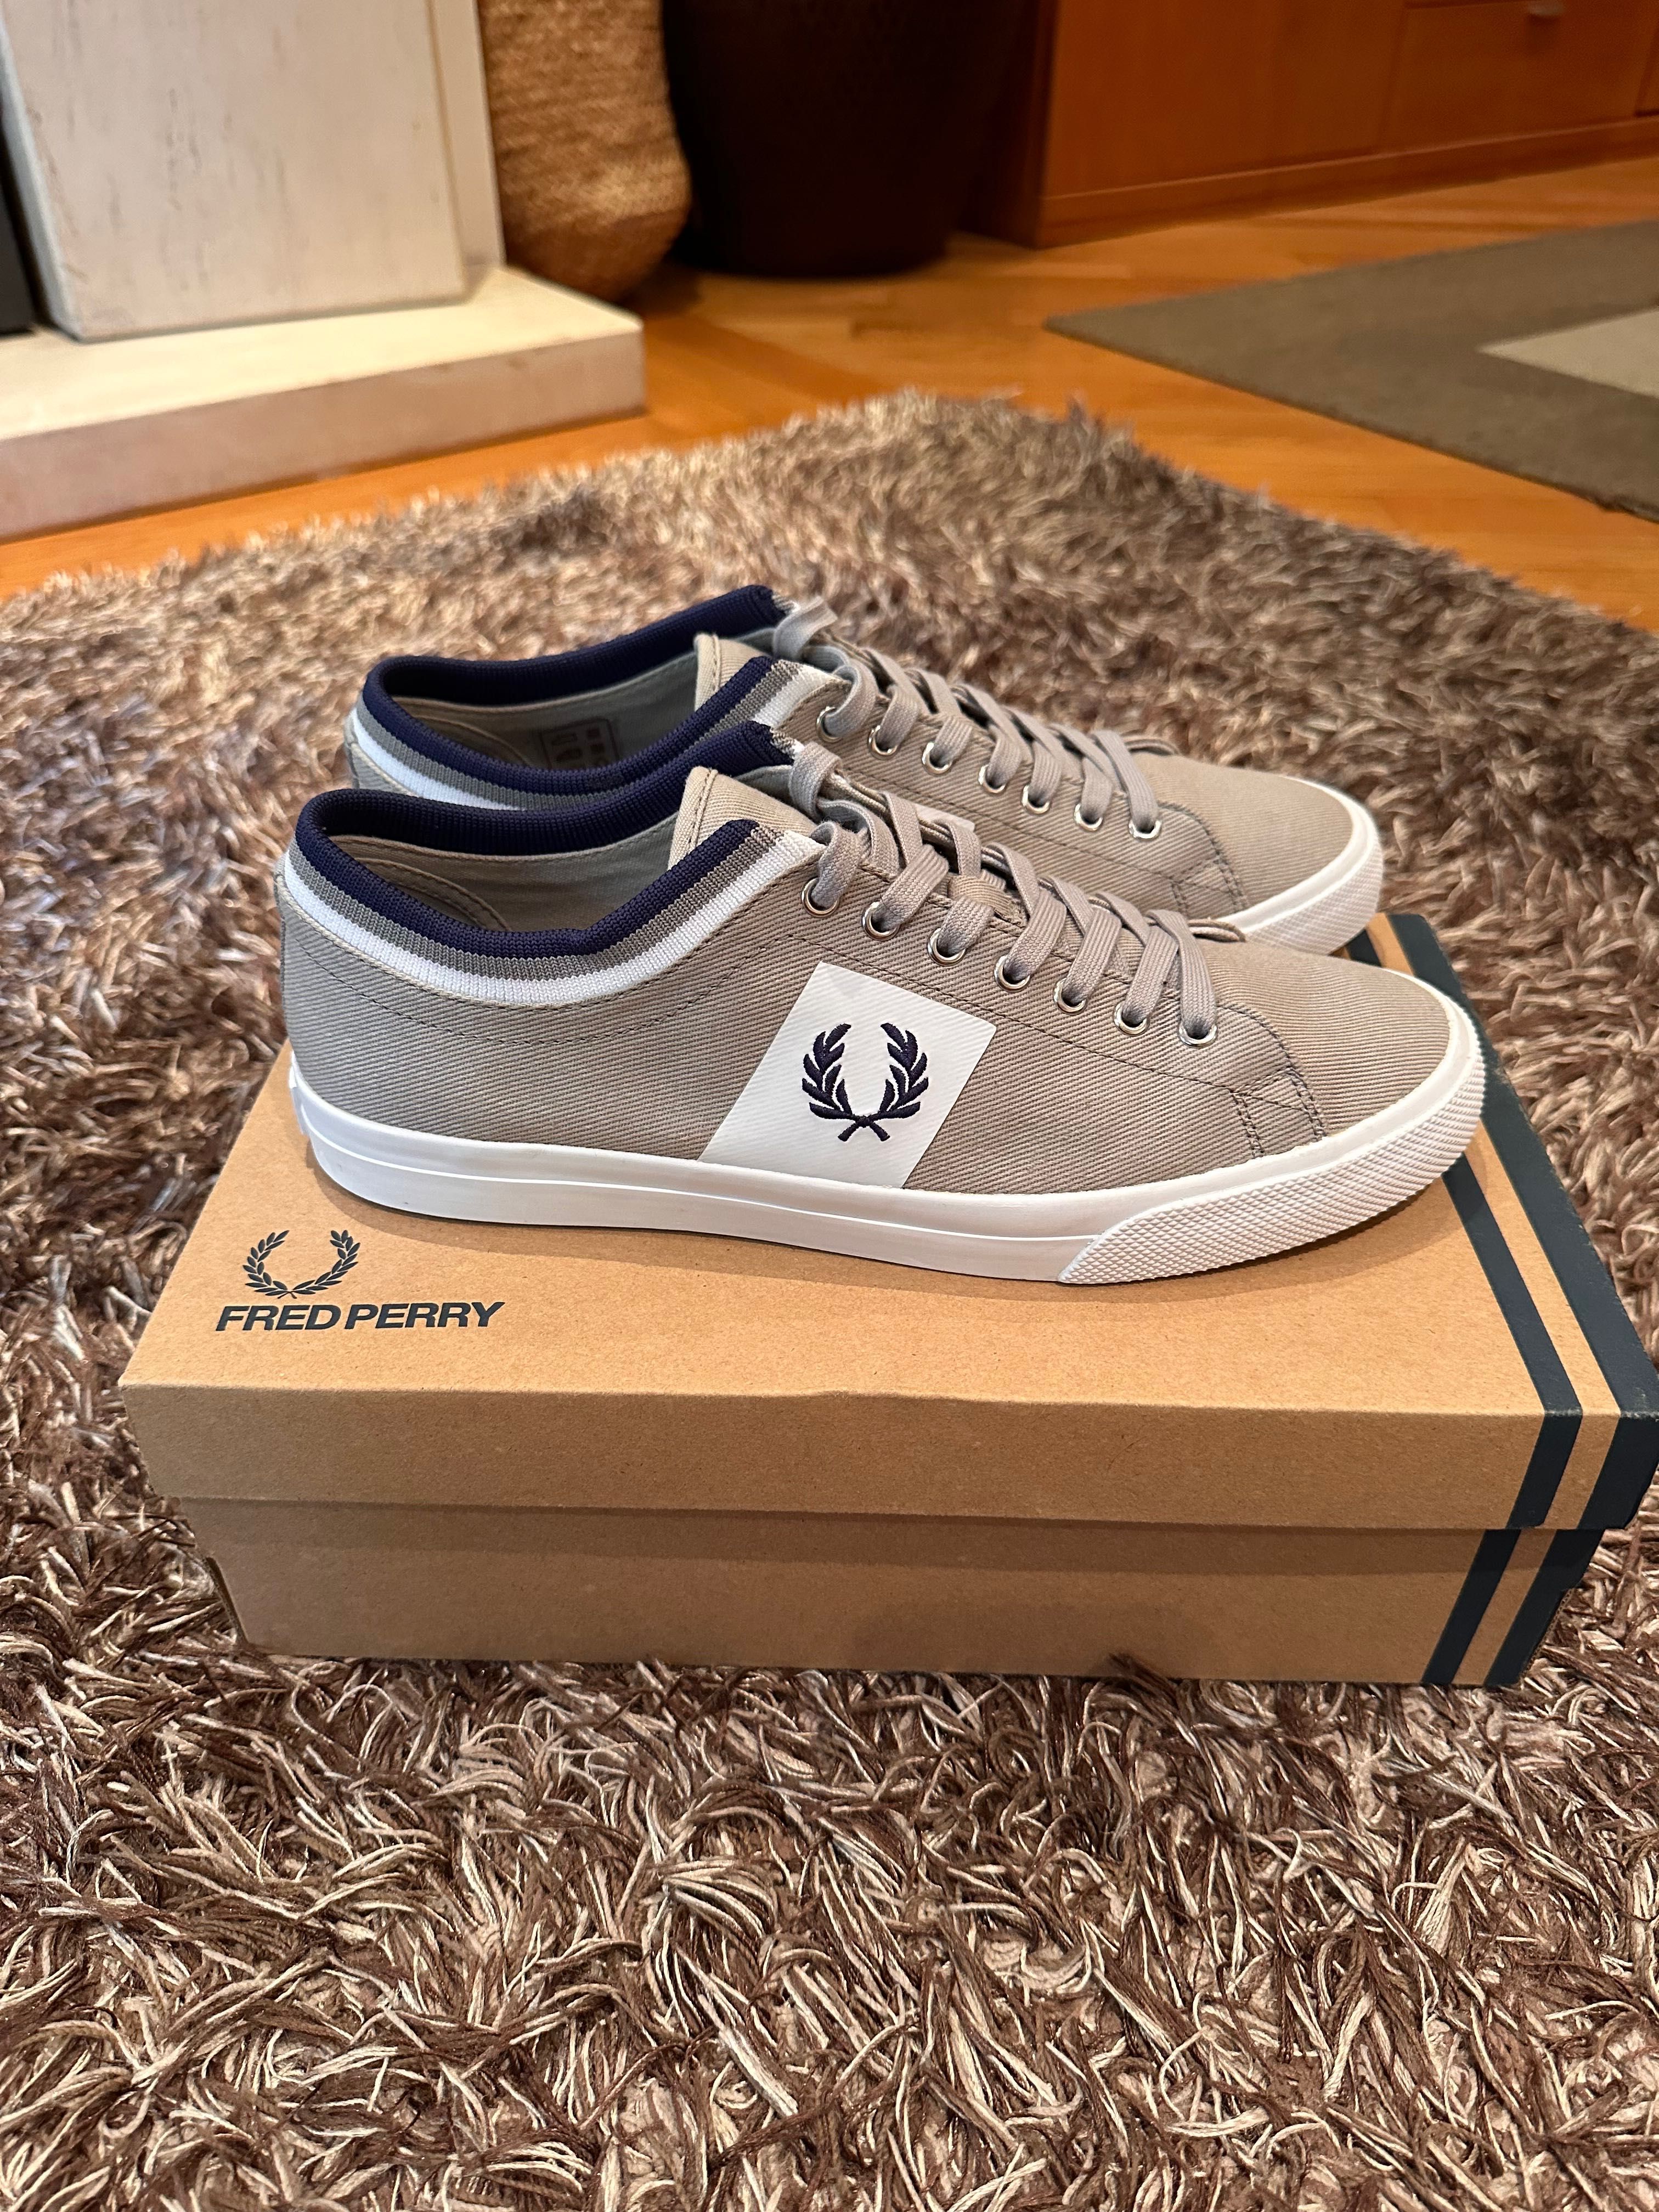 Sapatilhas Fred Perry - Tam 42